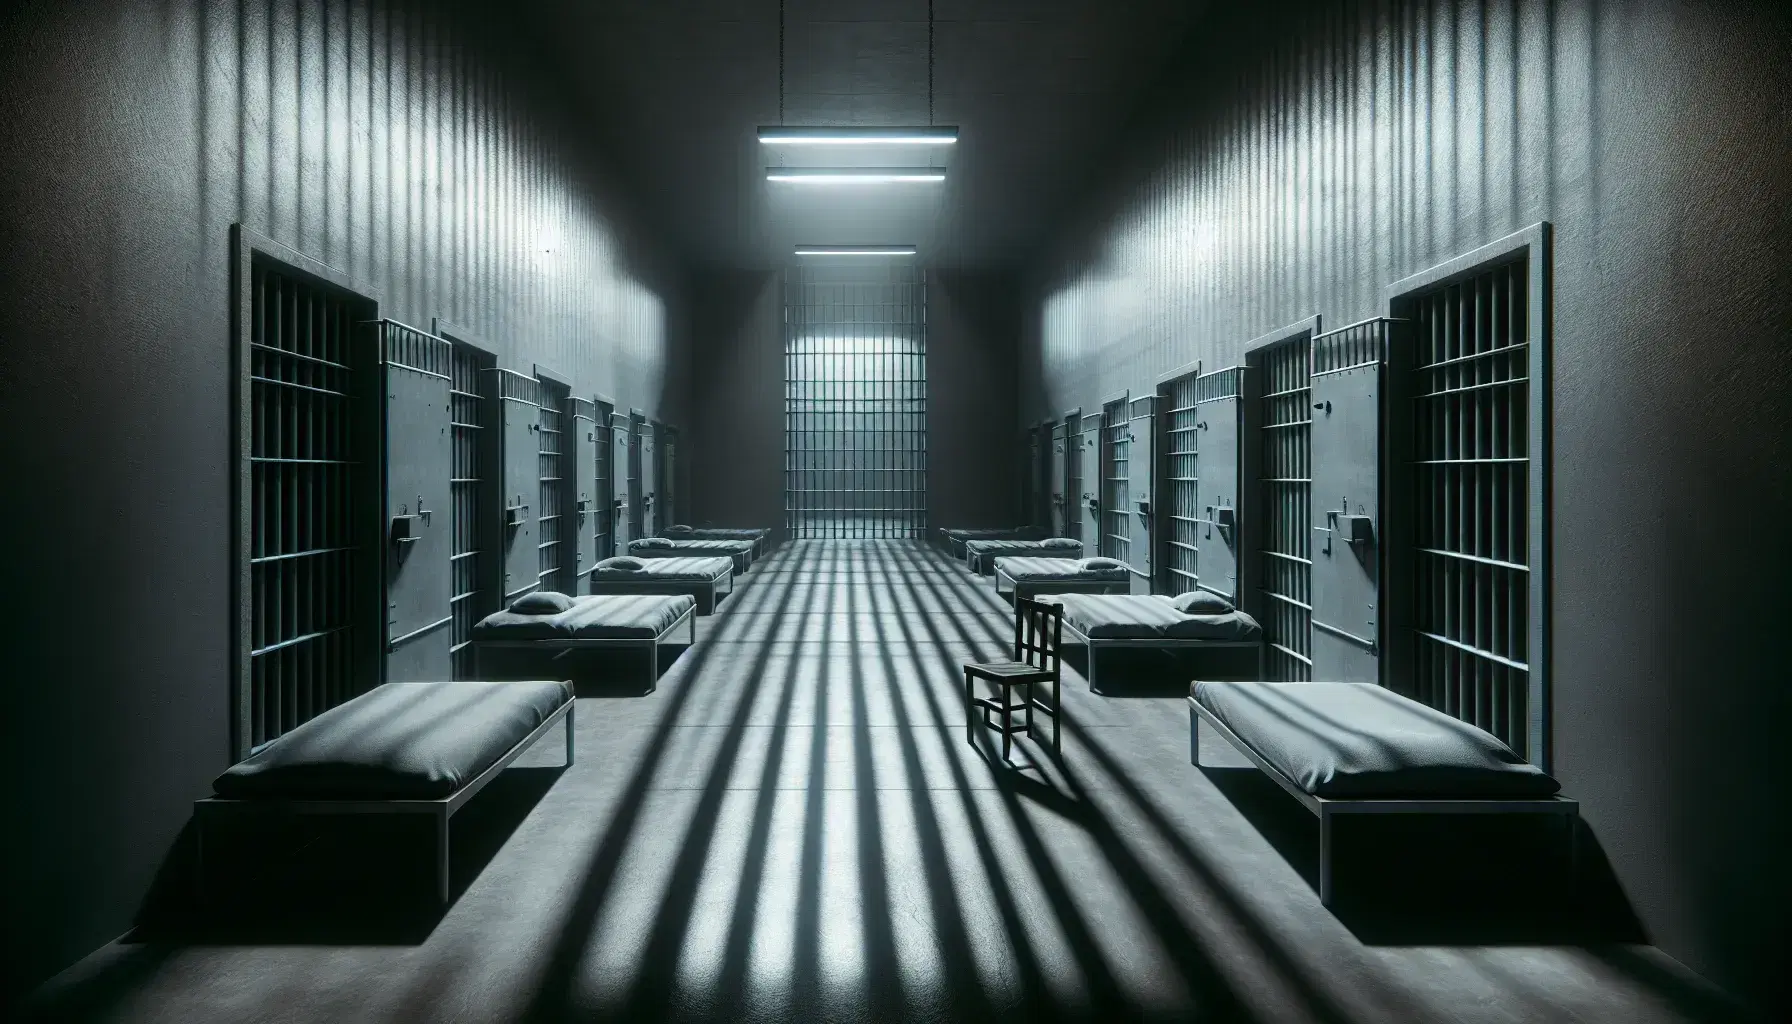 Dimly lit prison interior with a row of three open-barred cells, each with a plain cot, and a solitary wooden chair facing them, casting long shadows on the polished stone floor.